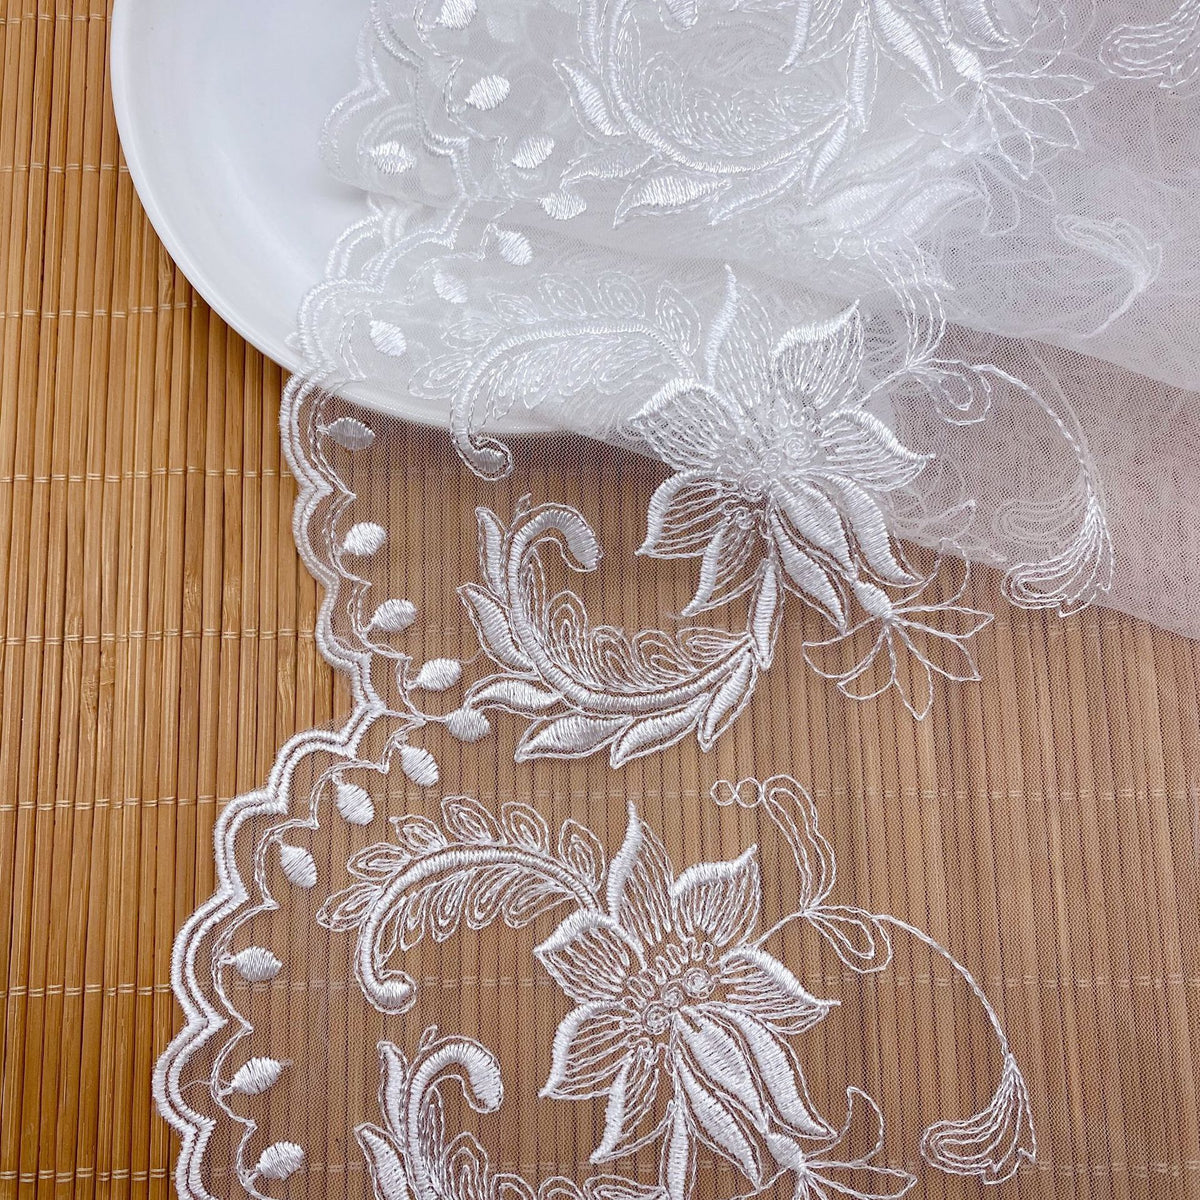 20 Yards Embroidered White Floral Galloon Lace 1 Width 